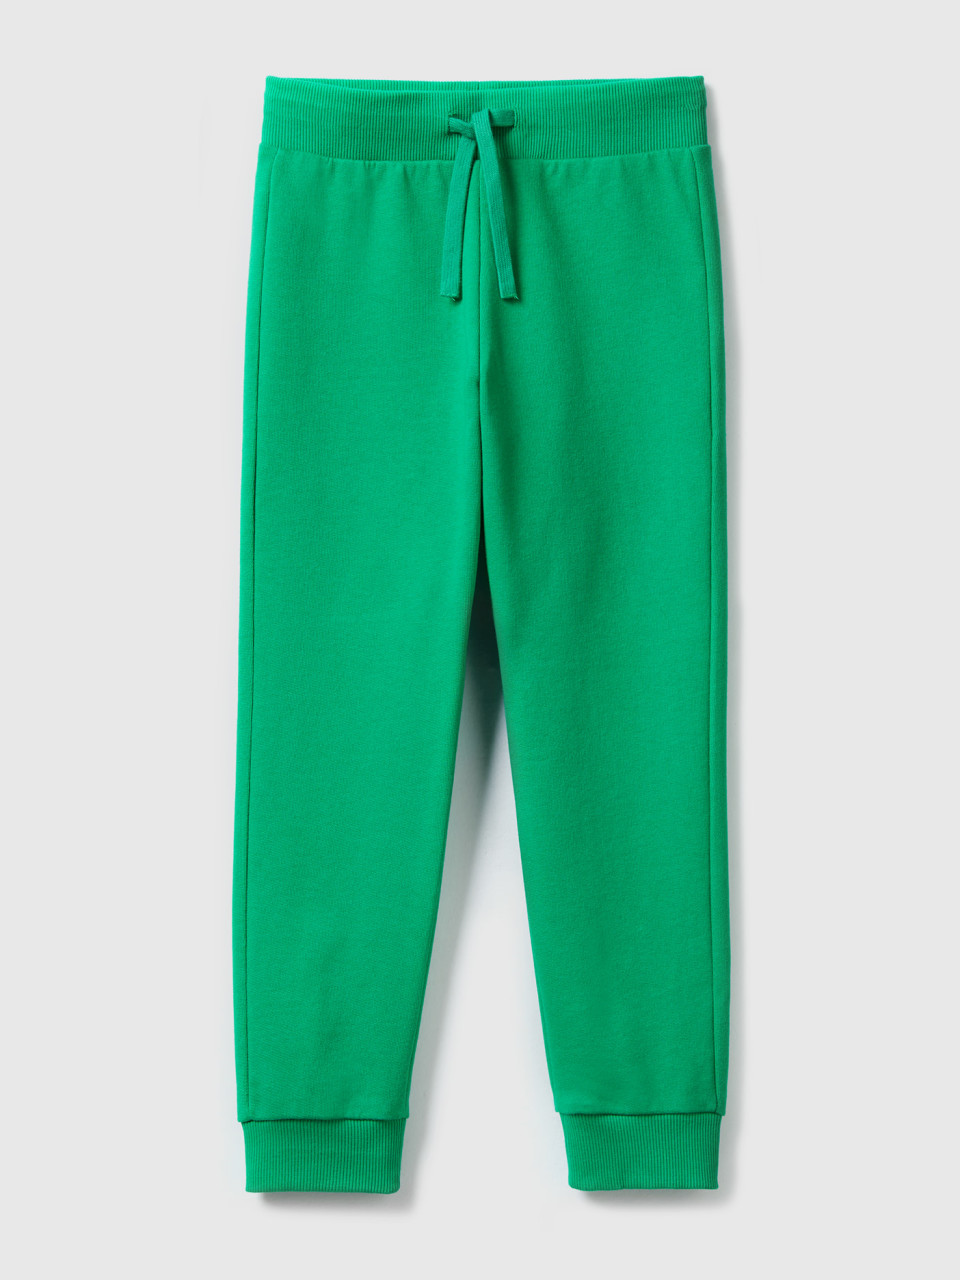 Benetton, Sporty Trousers With Drawstring, Green, Kids